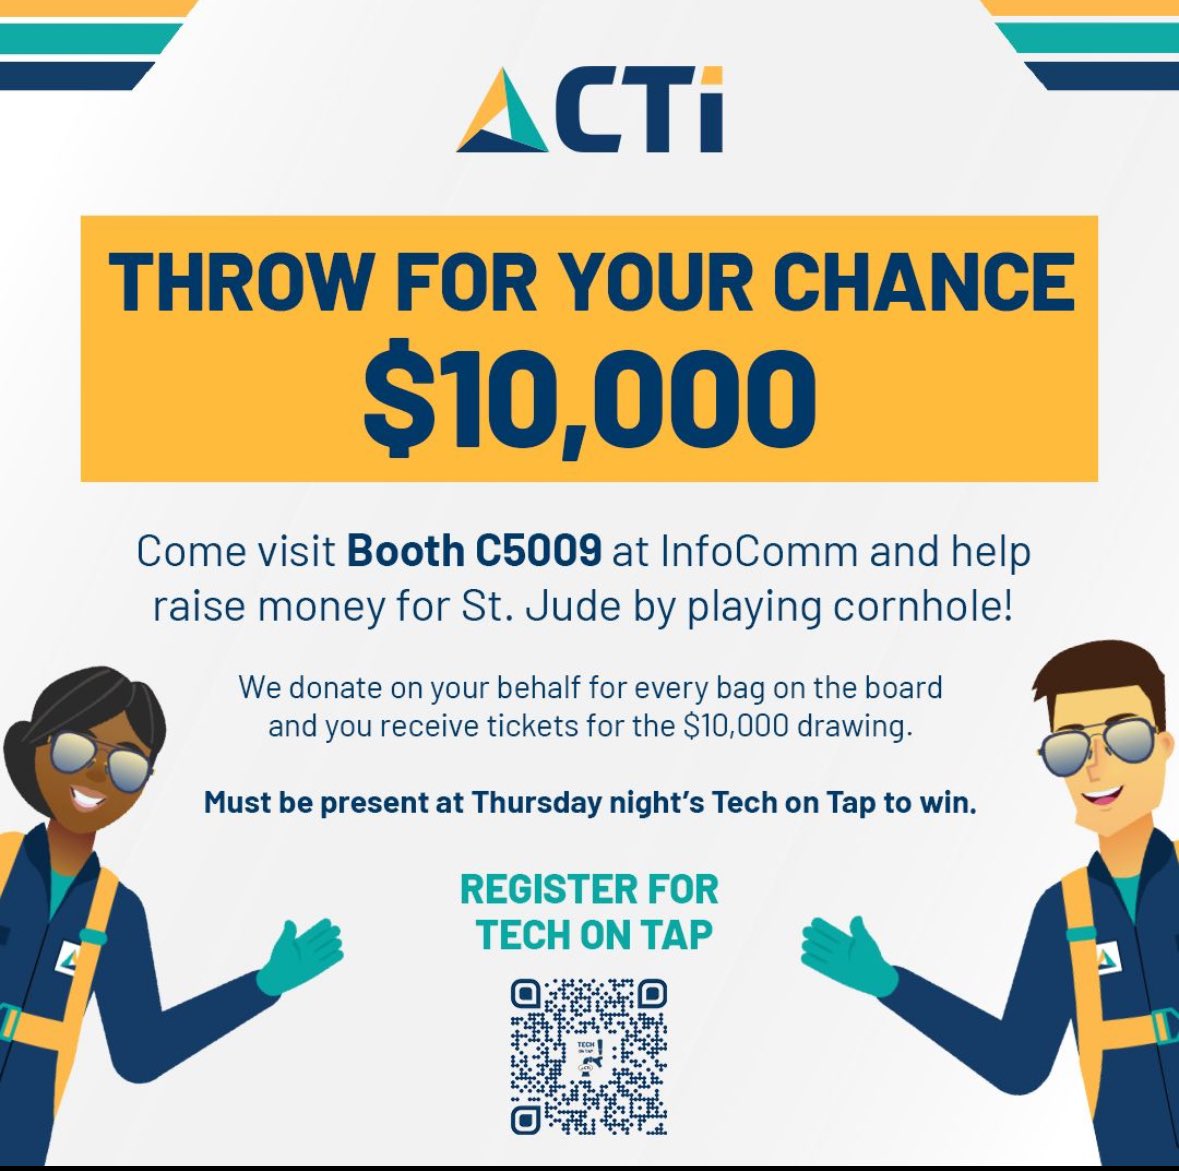 Coming to #infocomm24 be sure to register and attend the @CTIAV Tech On Tap events for a chance to throw for $10,000 and to support @StJude 

cti.com/ic24-tech-on-t…